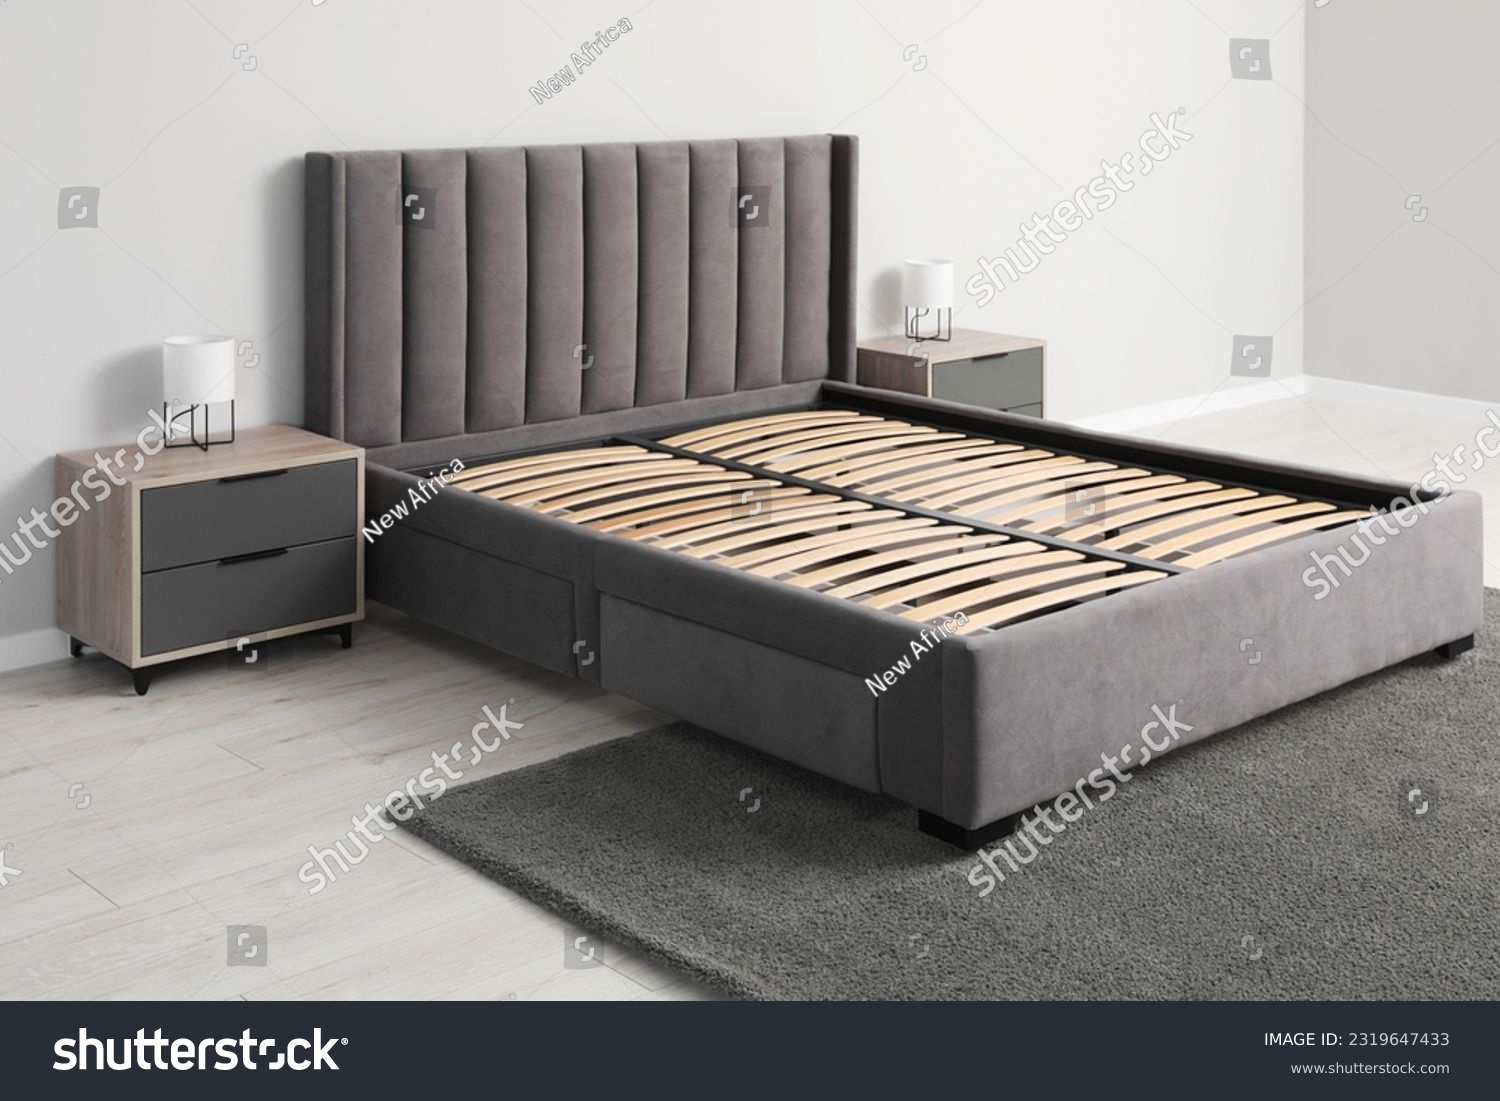 Comfortable bed with storage space for bedding under slatted base in room #2319647433